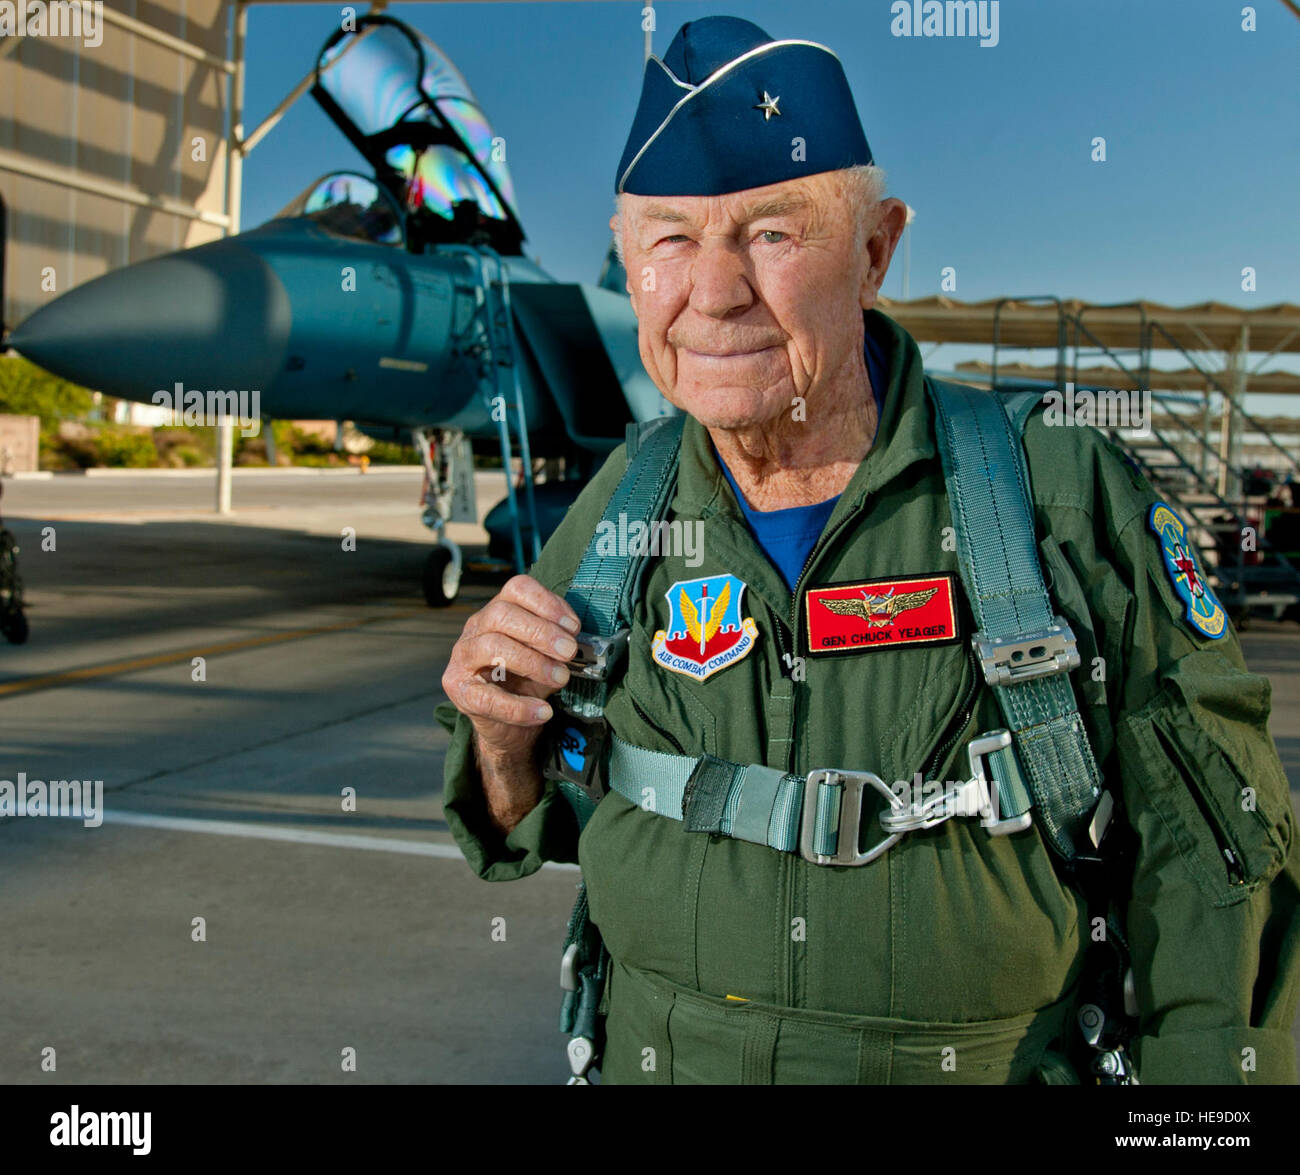 Retired Brig. Gen. Charles E. 'Chuck' Yeager prepares to board an F-15D Eagle from the 65th Aggressor Squadron Oct. 14, 2012, at Nellis Air Force Base, Nev. In a jet piloted by Capt. David Vincent, 65th AGRS pilot, Yeager is commemorating the 65th anniversary of his historic breaking of the sound barrier flight Oct. 14, 1947, in the Bell XS-1 rocket research plane, named 'Glamorous Glennis.' Yeager was awarded the prestigious Collier Trophy for his landmark aeronautical achievement. Stock Photo